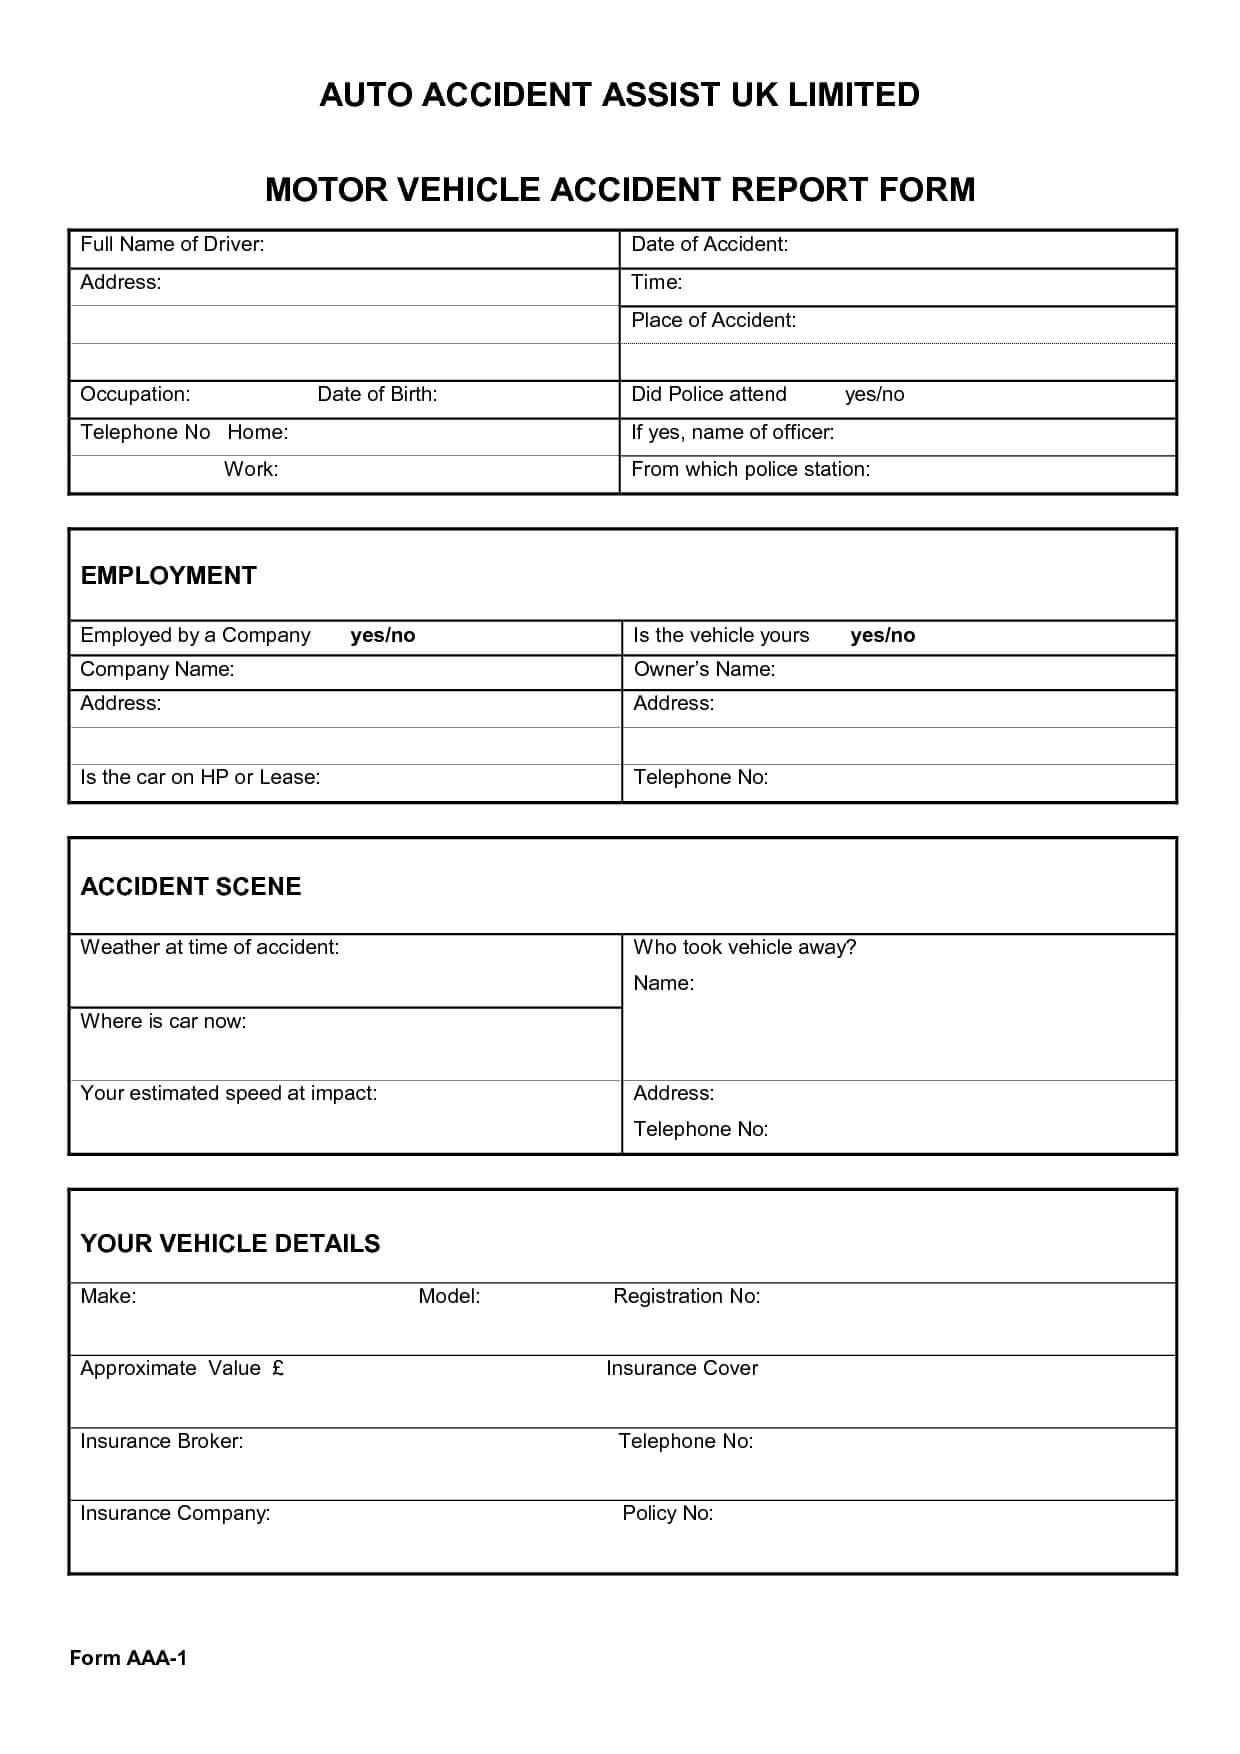 005 Vehicle Accident Report Form Template 290061 Ideas Inside Motor Vehicle Accident Report Form Template